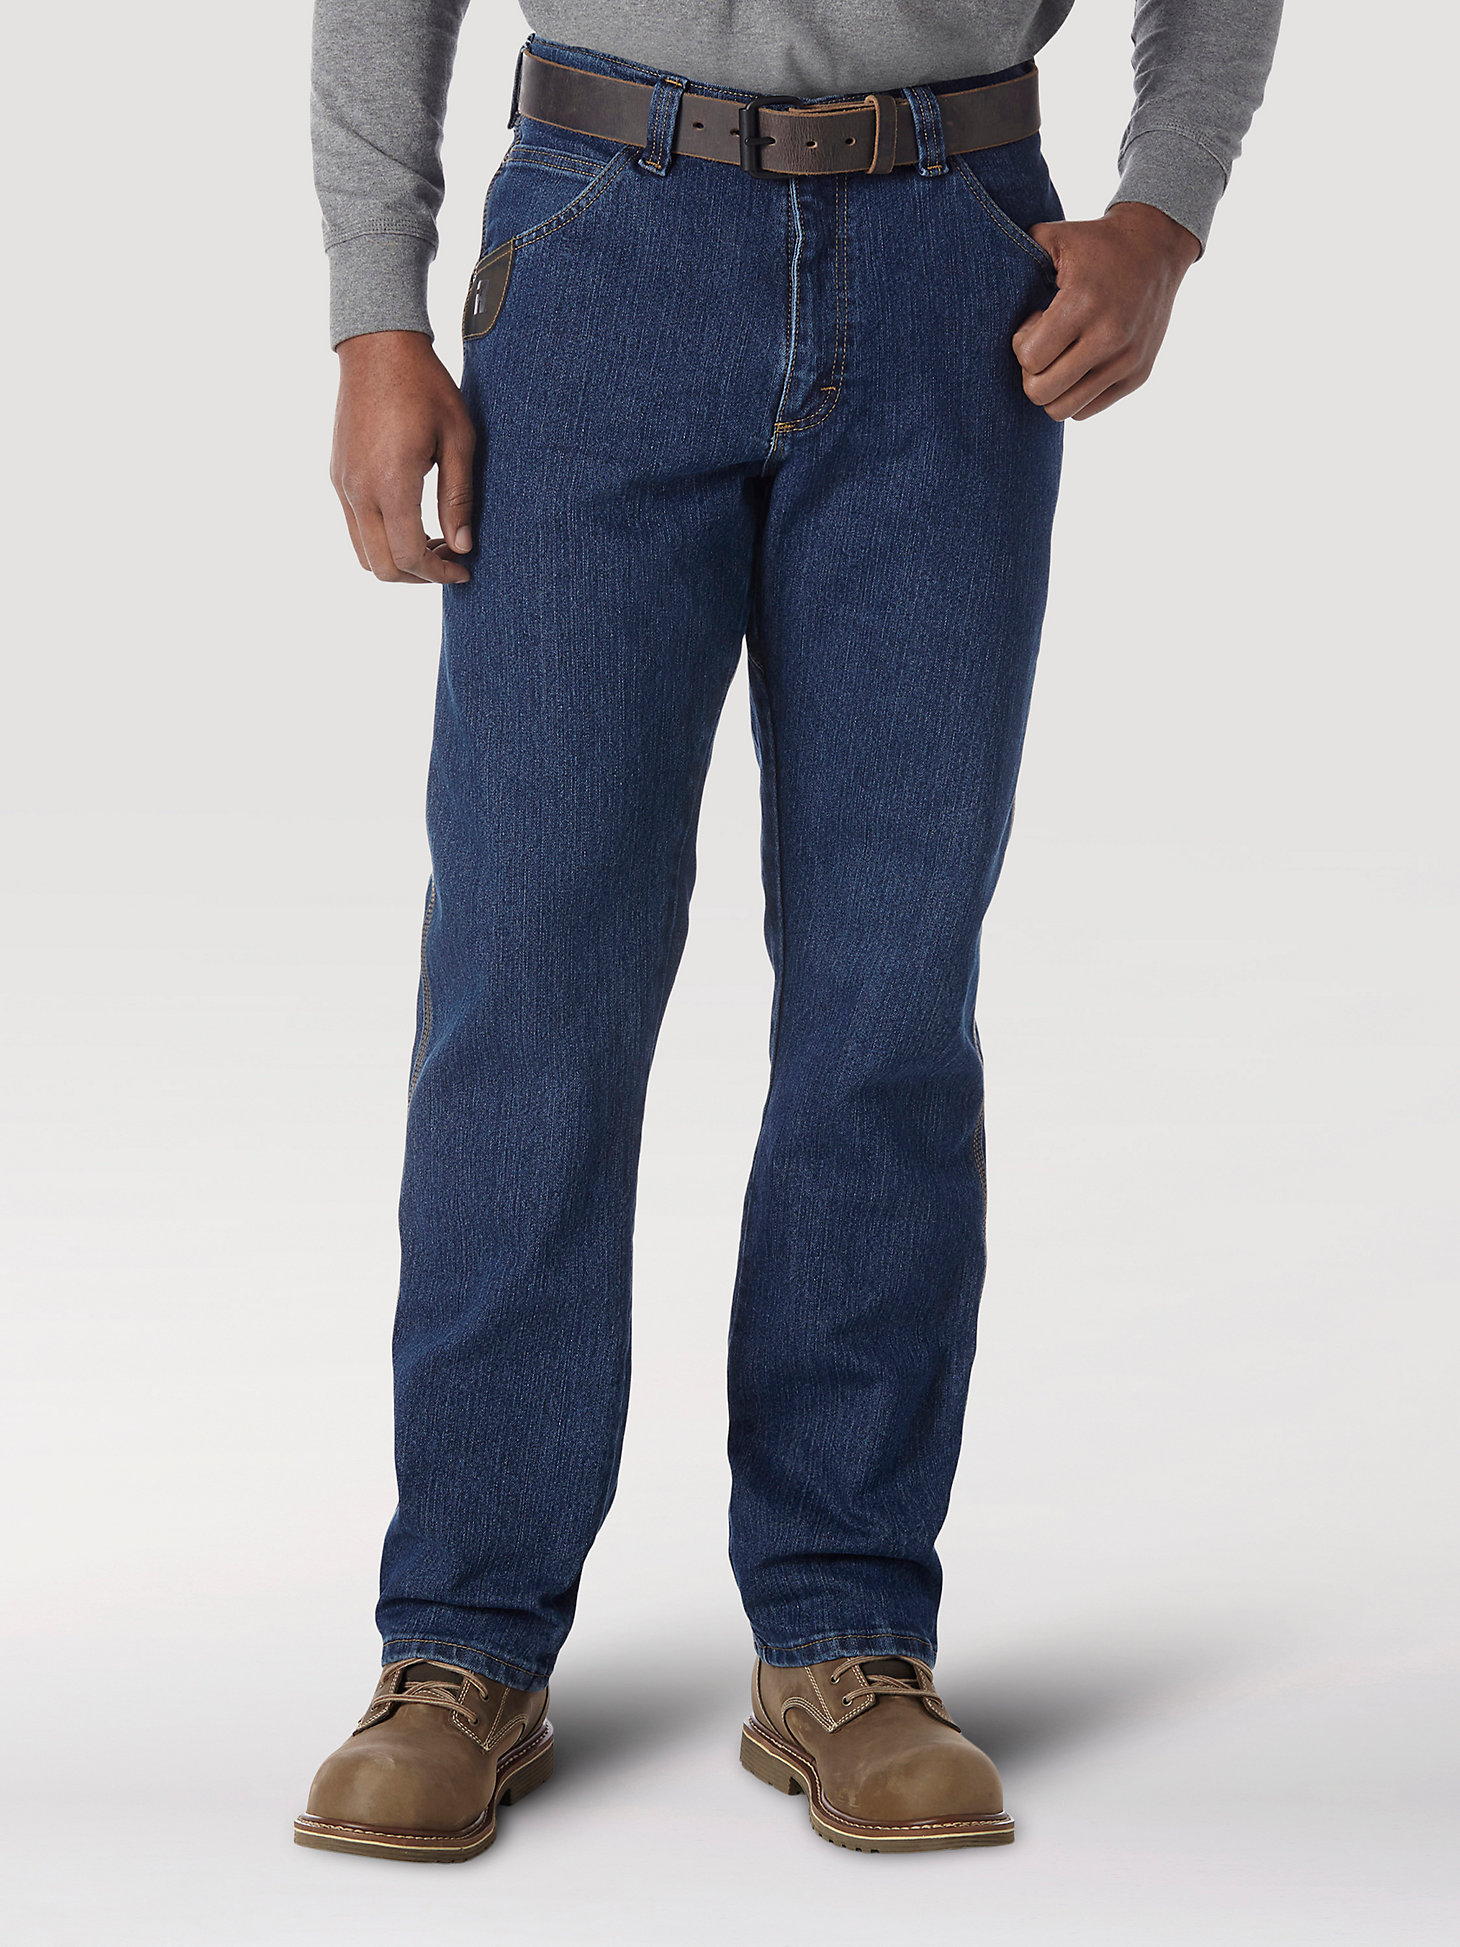 Wrangler® RIGGS Workwear® Advanced Comfort Five Pocket Jean in Mid Stone main view